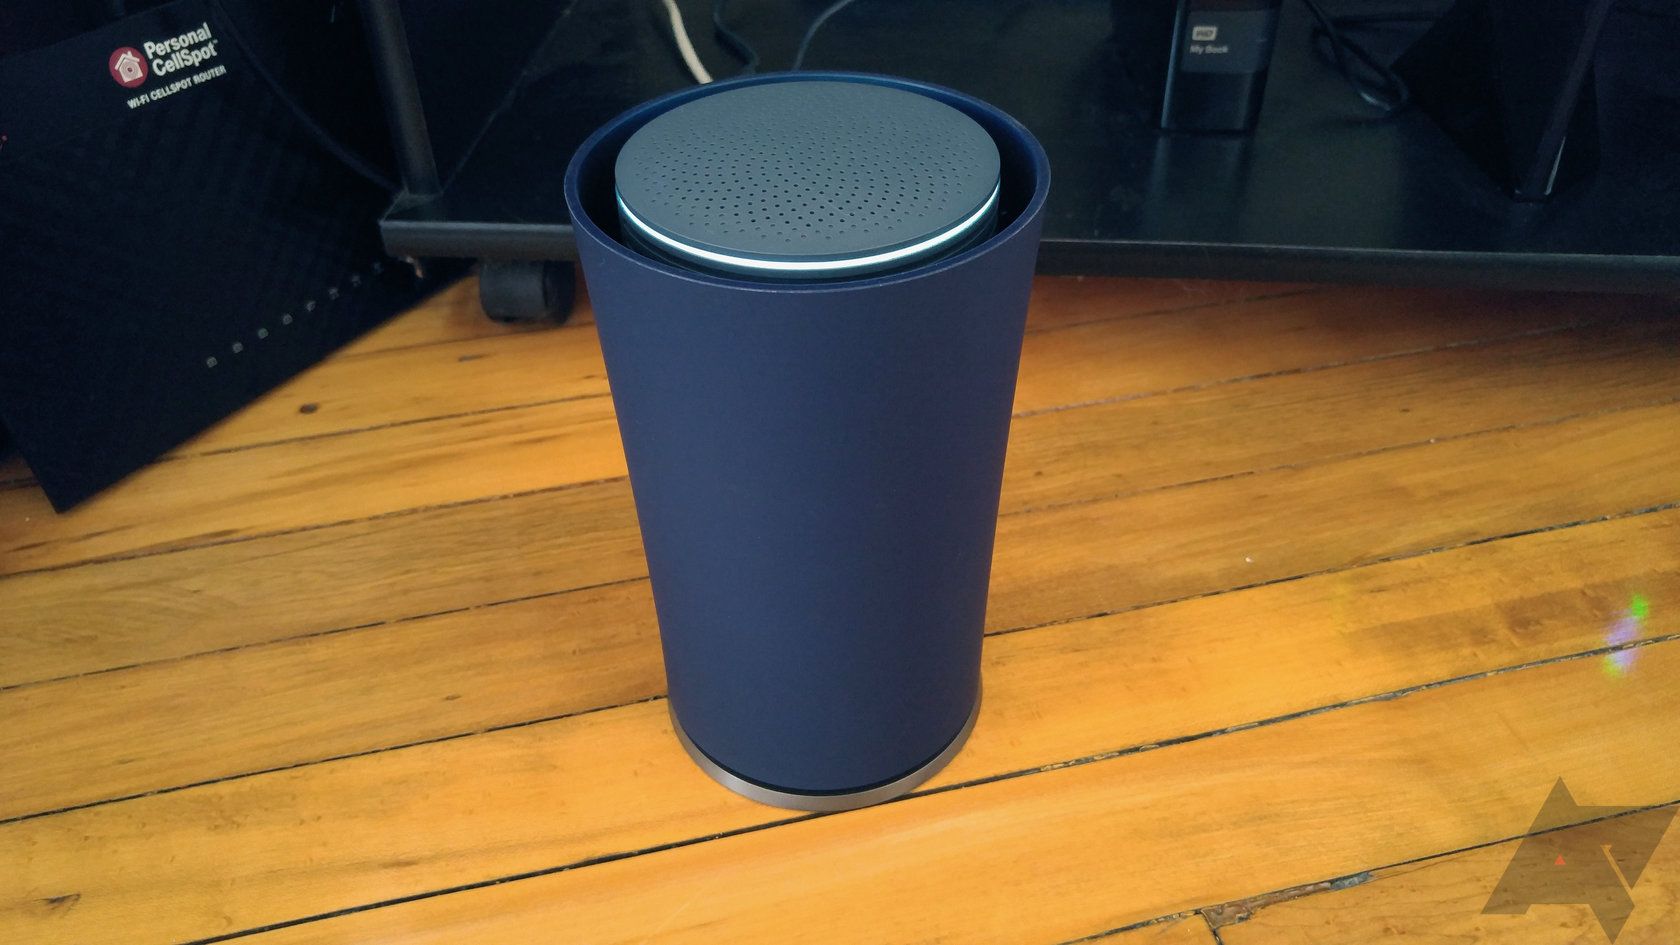 Google will end support for OnHub, a $200 router and smart home hub launched in 2015, in December 2022, offering owners 40% off the latest Nest Wifi router (Taylor Kerns/Android Police)